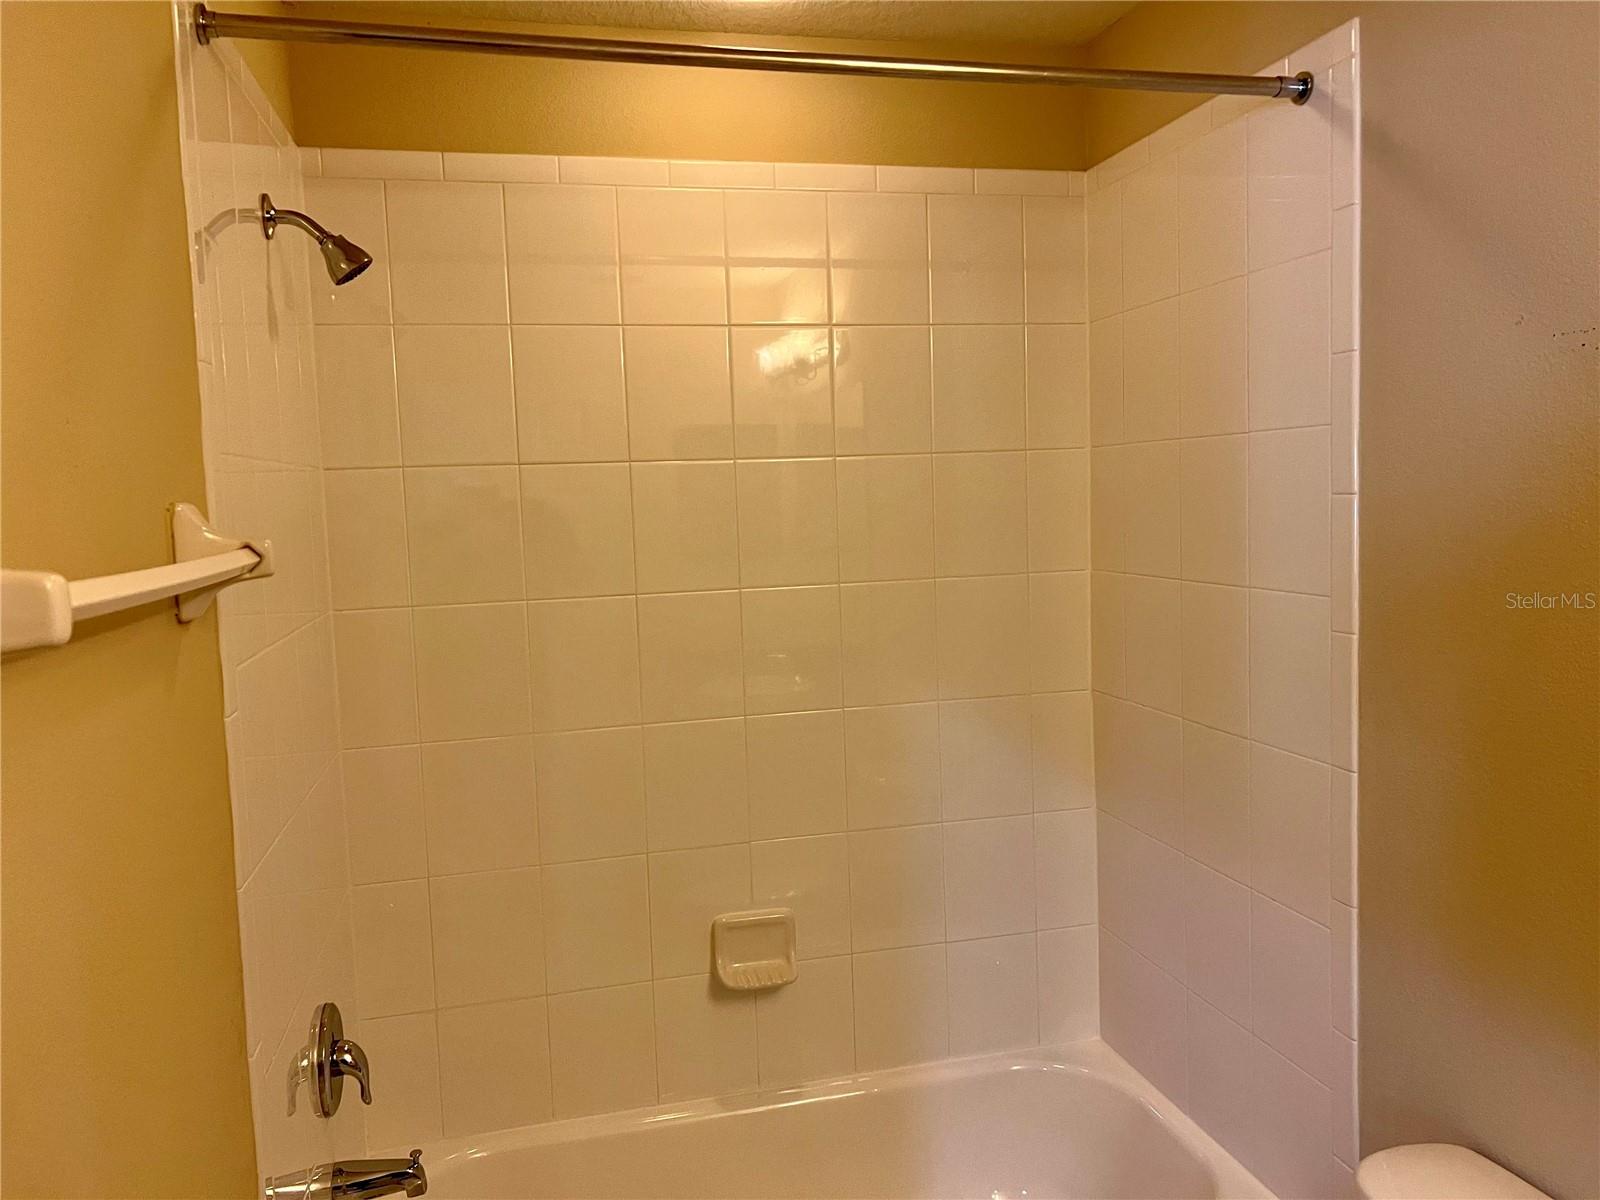 2nd full bath with tub and shower